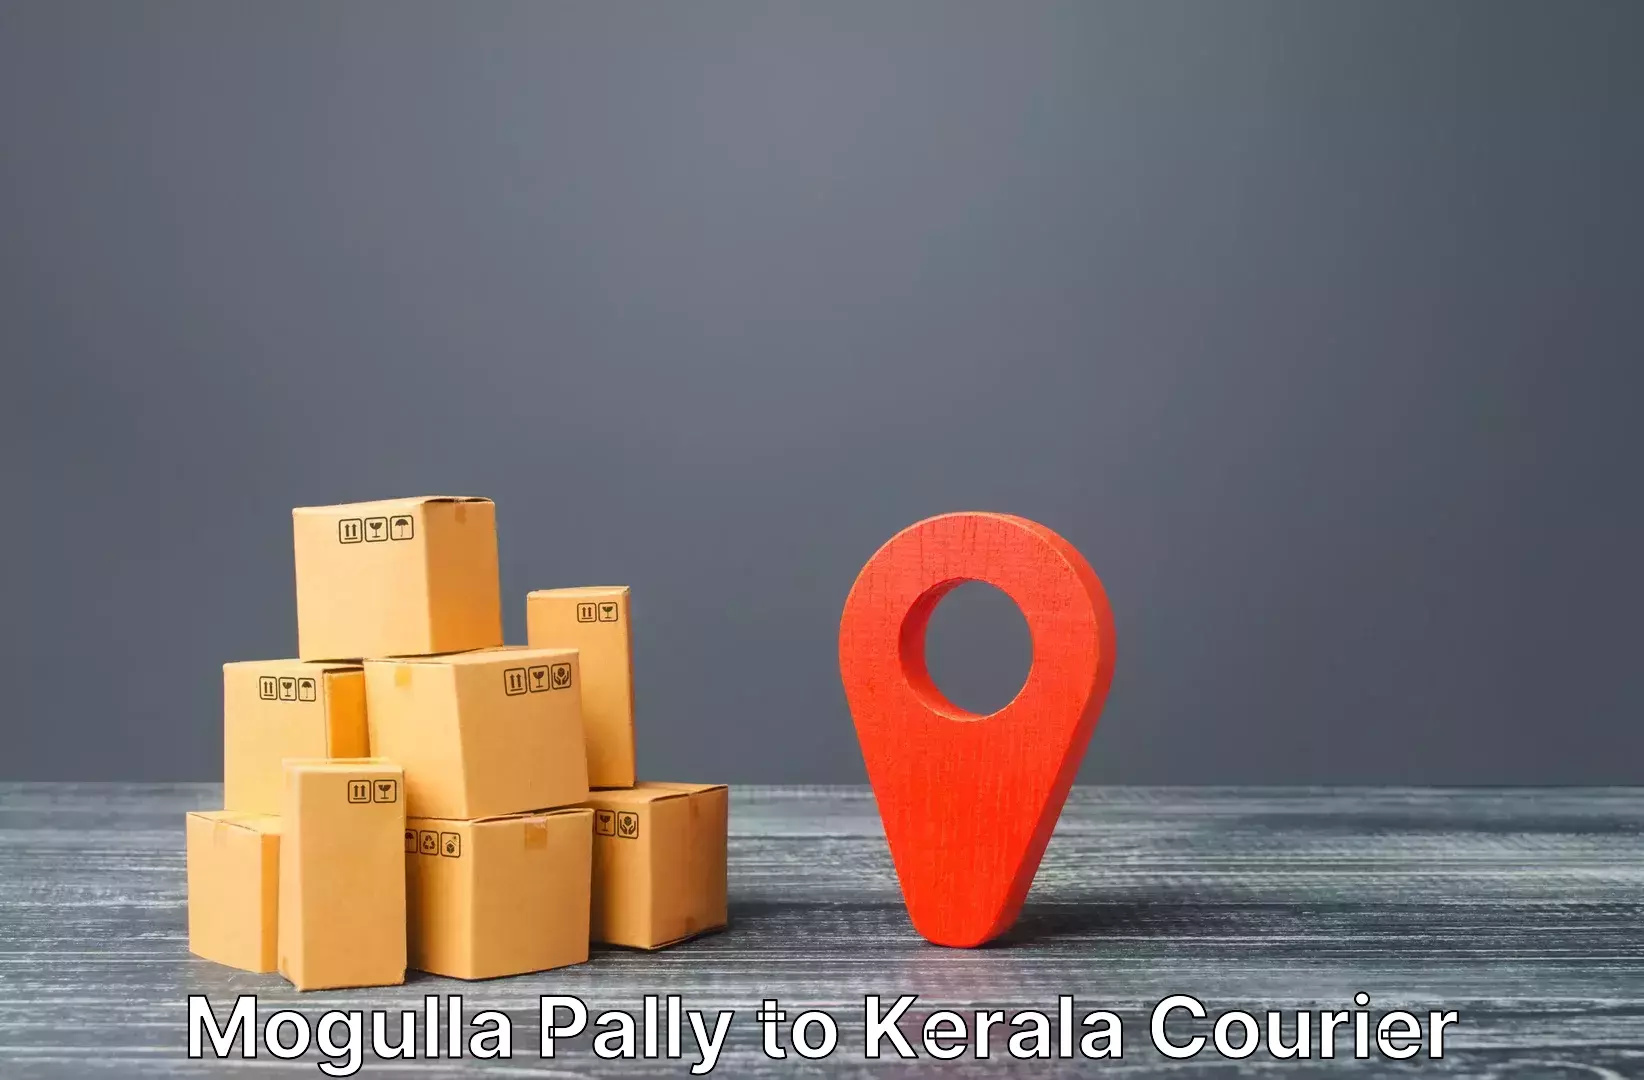 Luggage delivery news in Mogulla Pally to Kochi